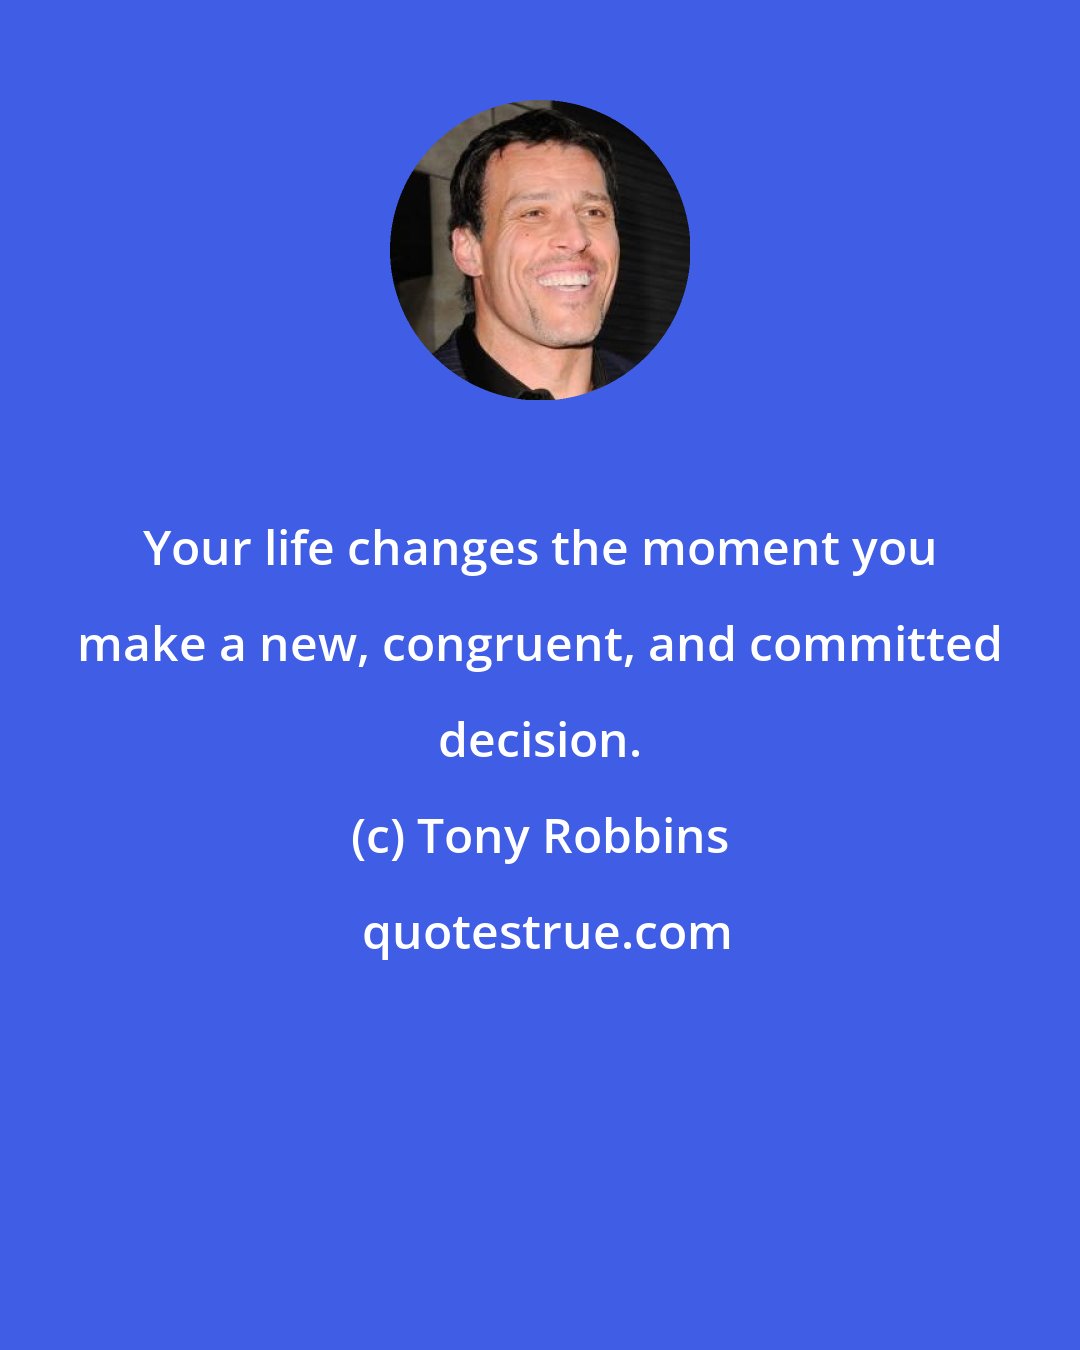 Tony Robbins: Your life changes the moment you make a new, congruent, and committed decision.